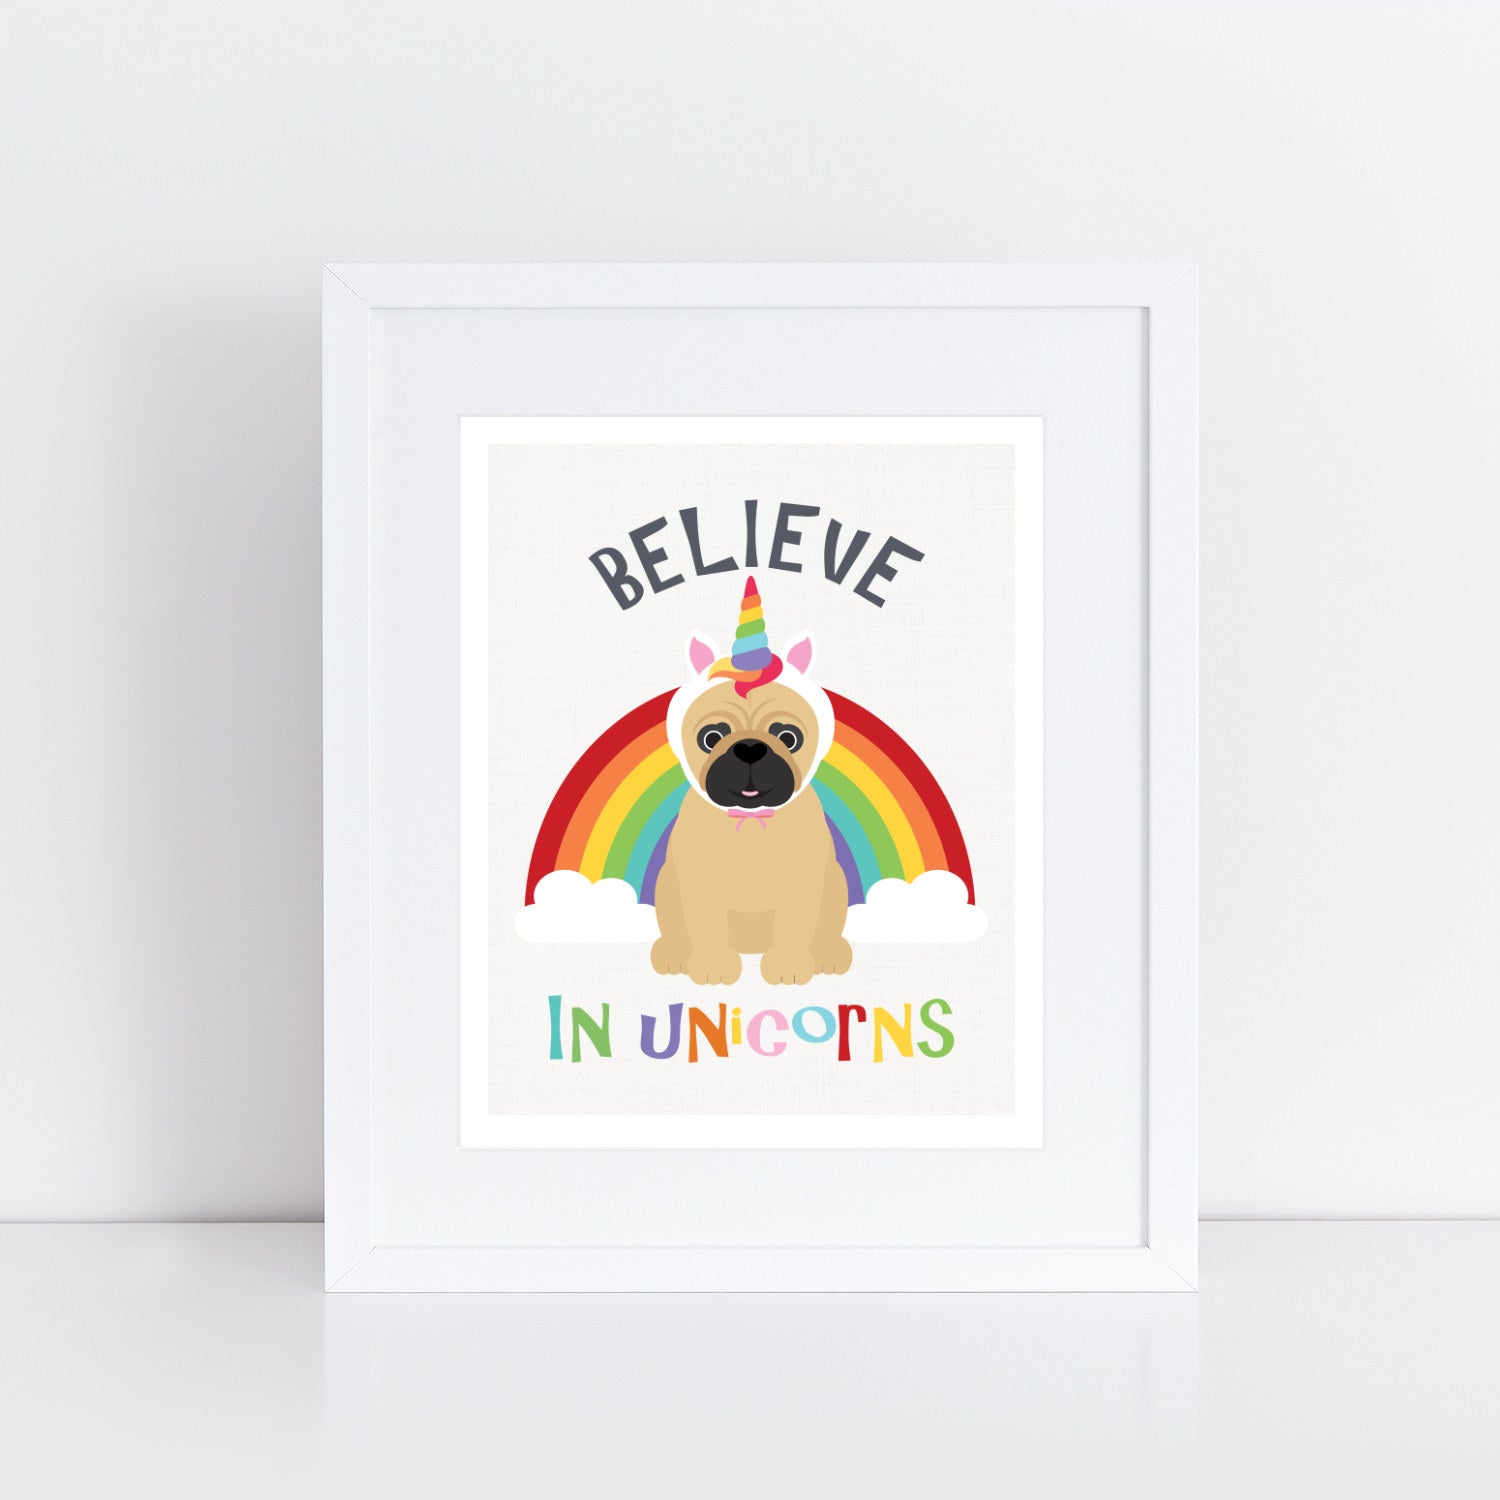 Pug dog infant of rainbow wearing a unicorn hat with the words Believe in unicorns Believe in unicorns believe in unicorns